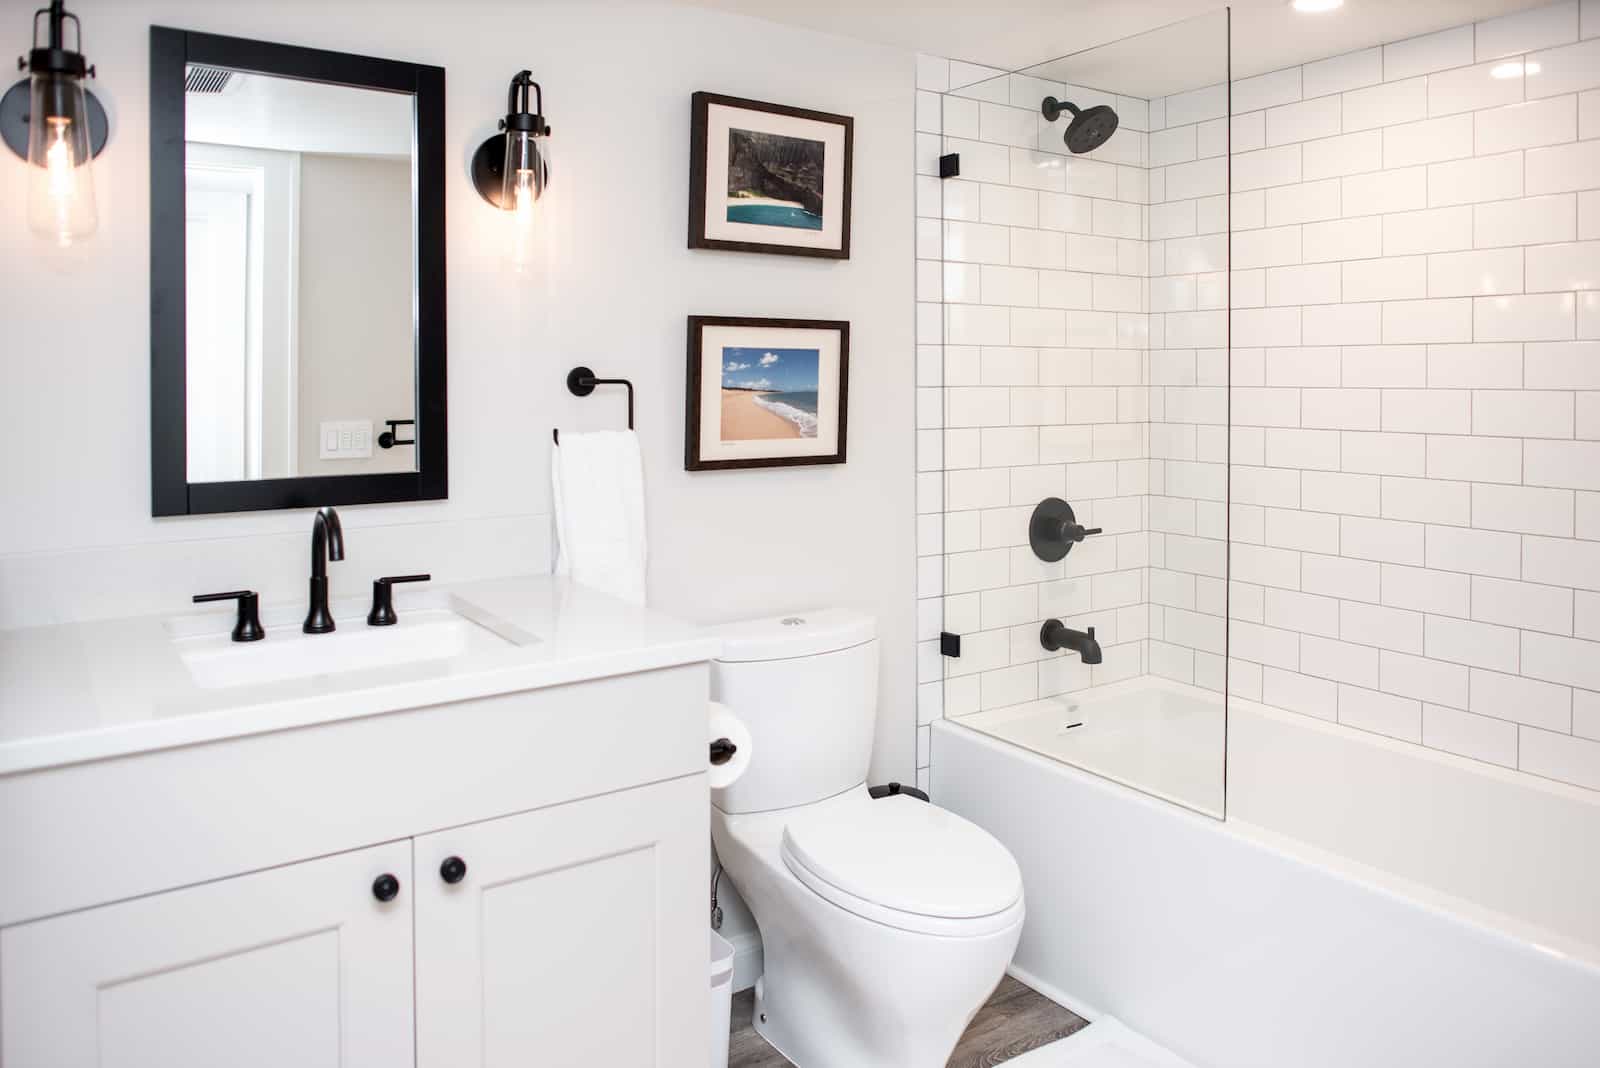 Are Permits Required For A Bathroom Remodel In Seattle - Do I Need A Permit To Add Bathroom In My House